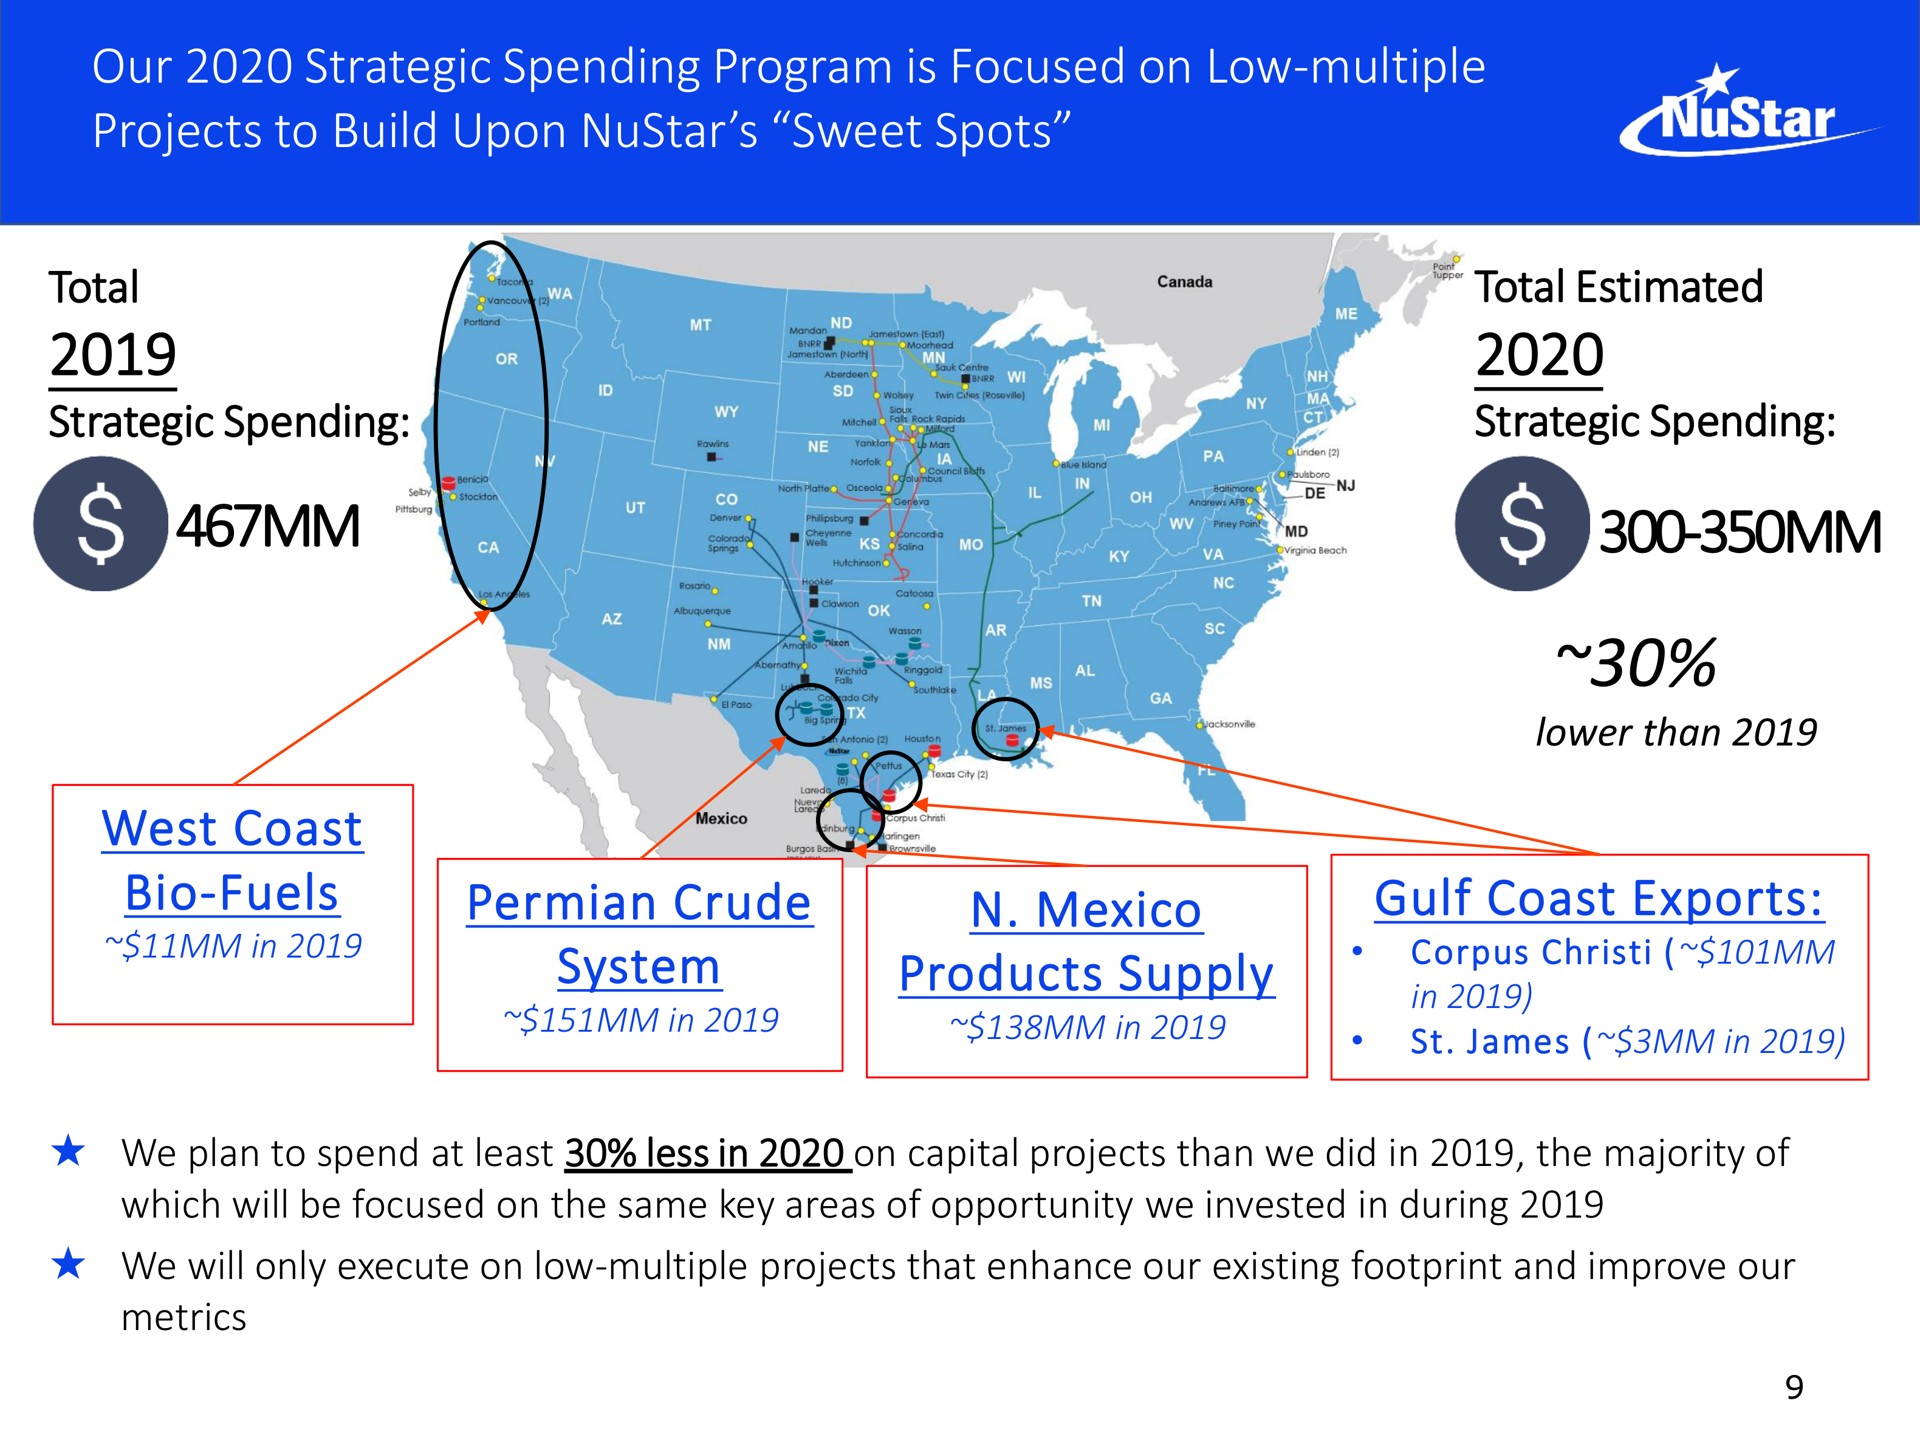 our strategic spending program is focused on low multiple projects to build upon sweet spots west coast fuels crude system products supply gulf coast exports mater | NuStar Energy